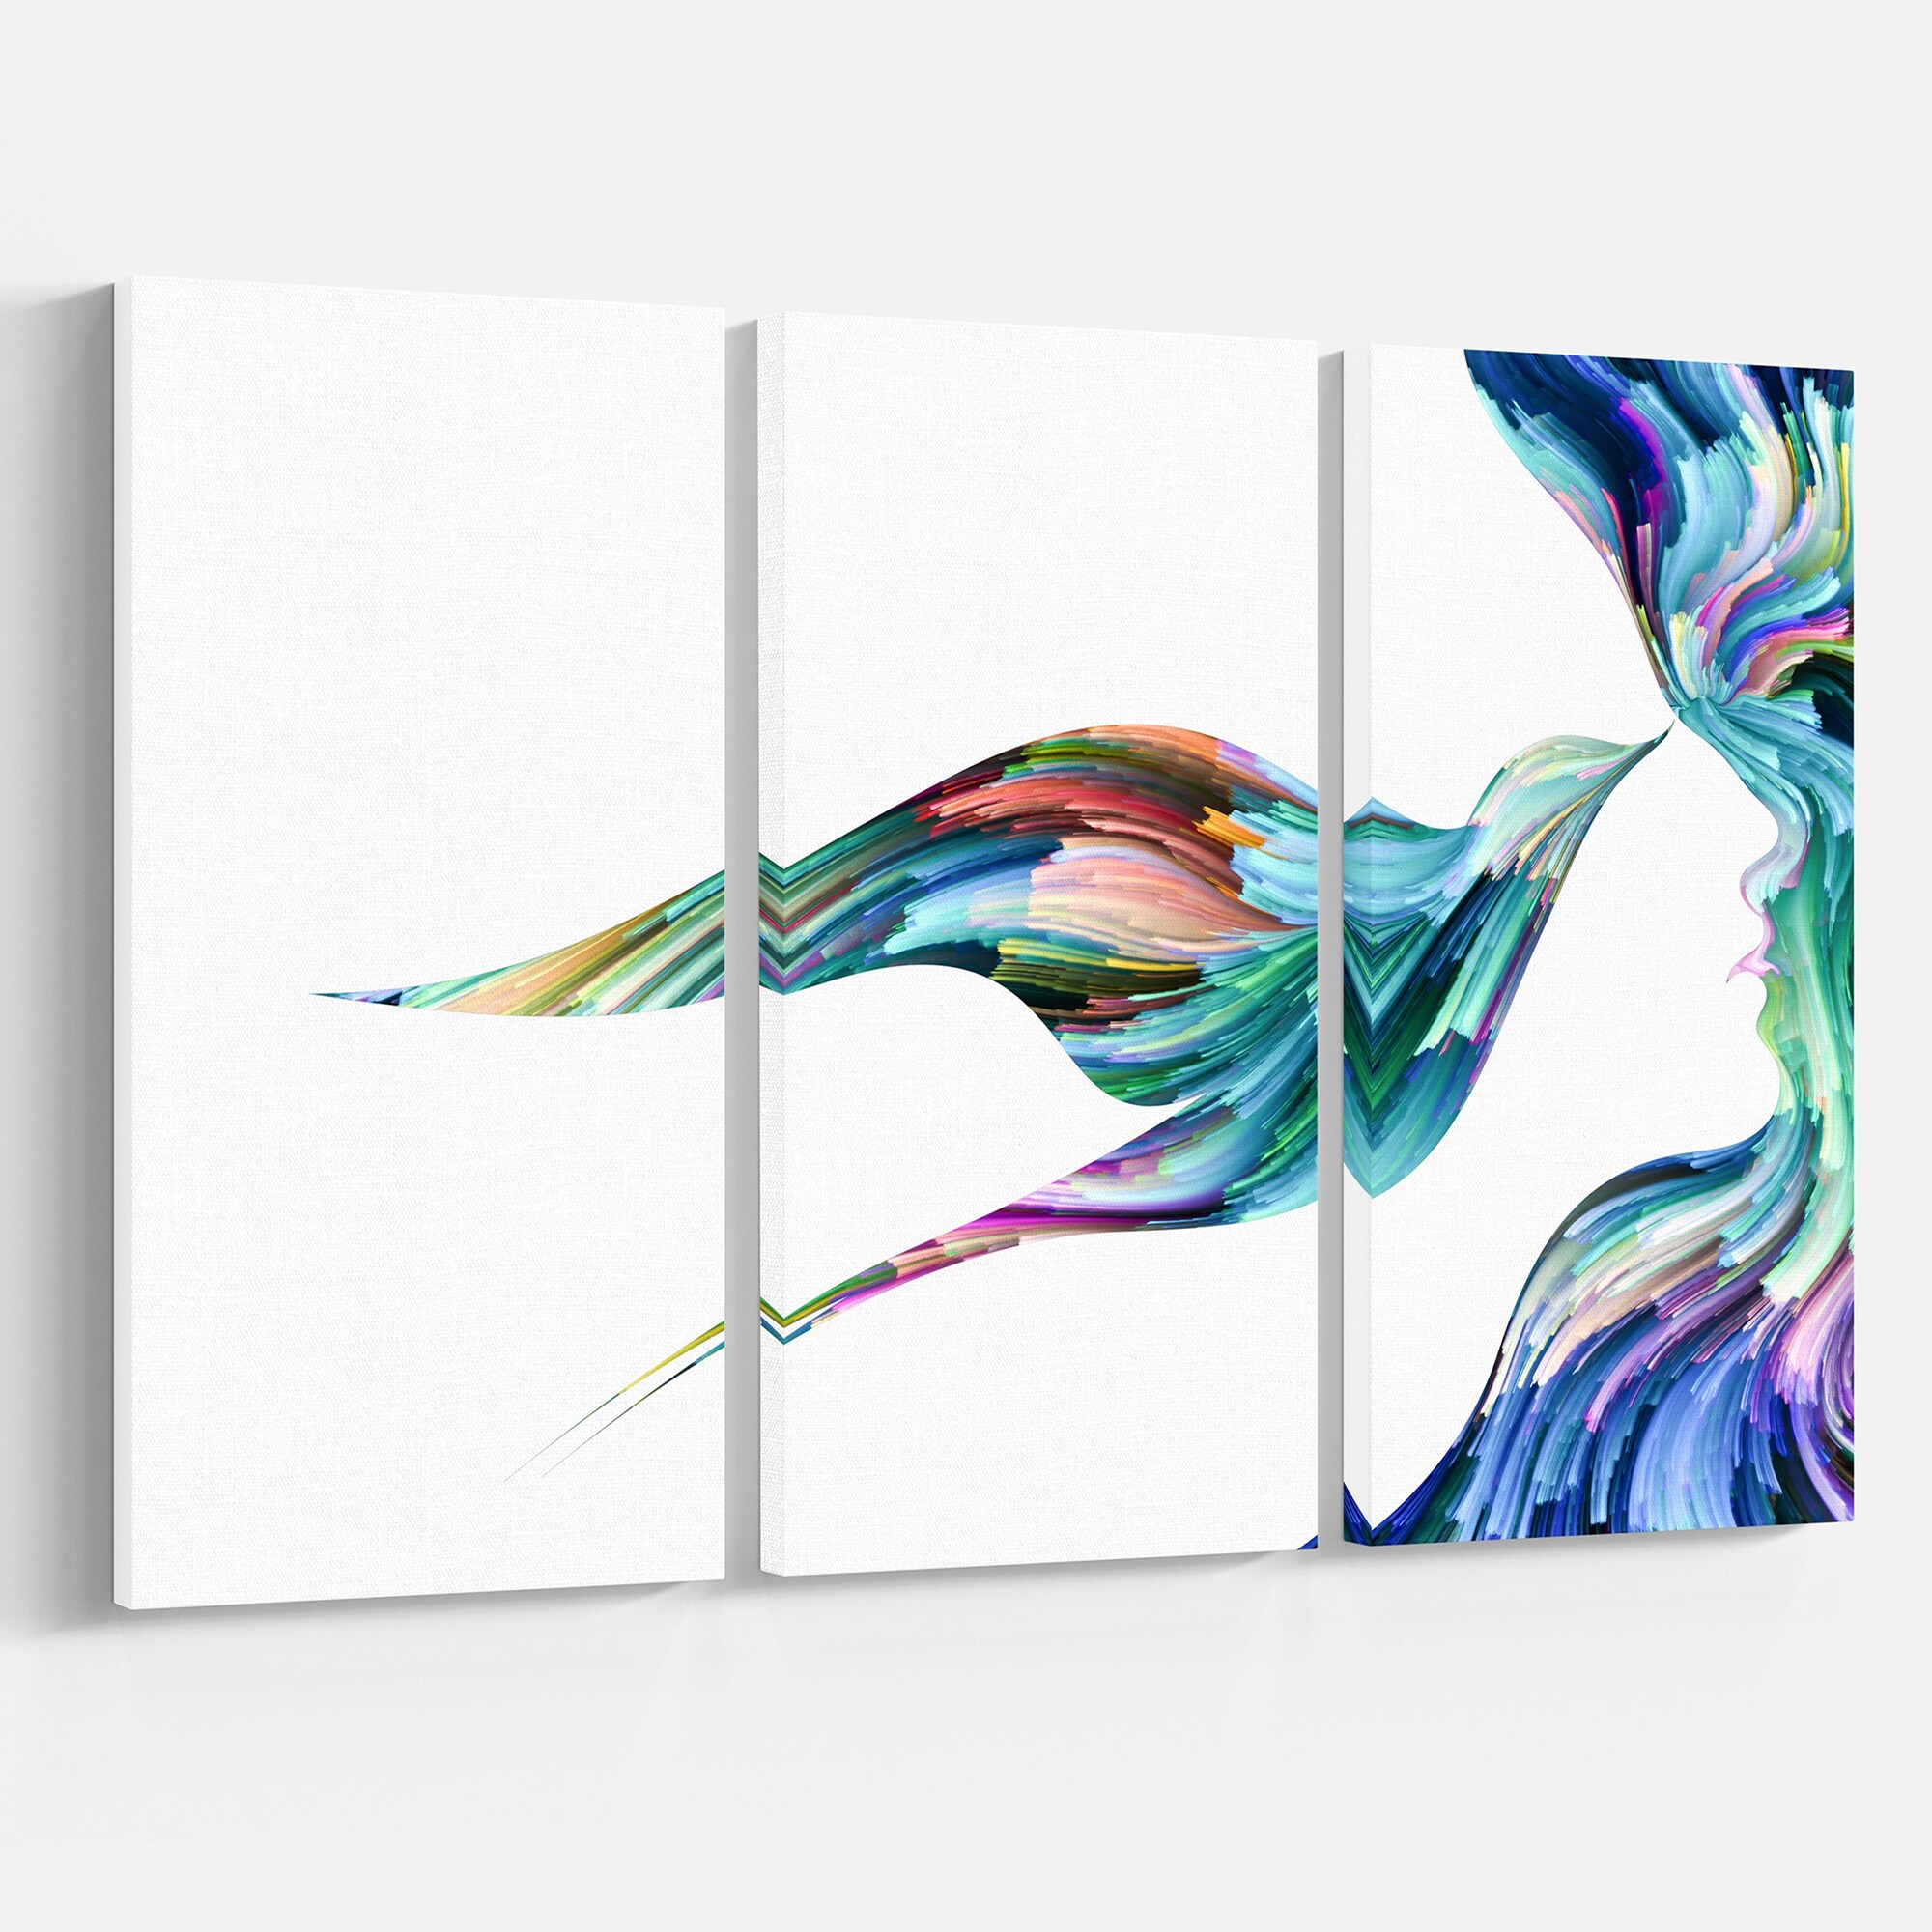 Designart 'Vivid Imagination' Abstract People Print on Wrapped Canvas Set - 36x28 - 3 Panels - 36 in. Wide x 28 in. High